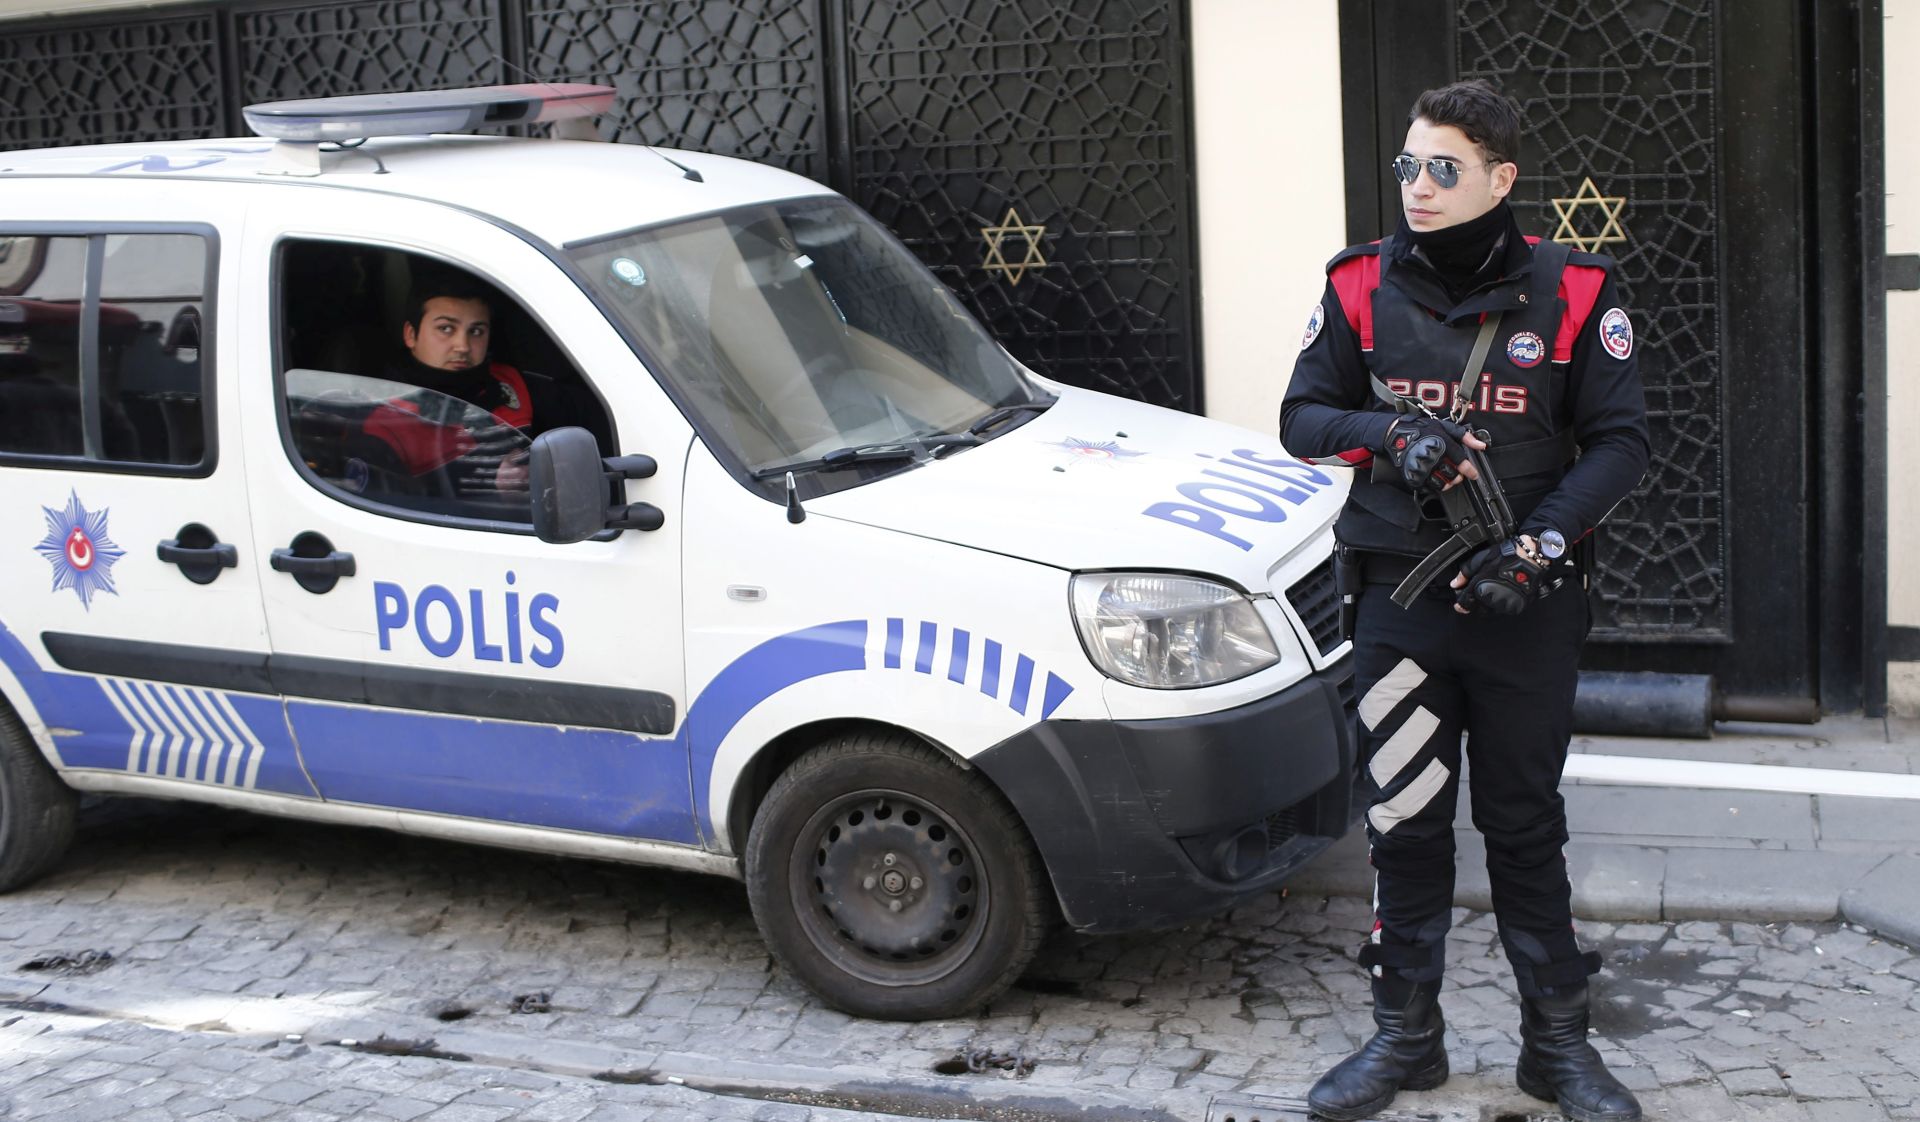 epa05234484 Armed Turkish police guards in front of the Neve Shalom synagogue in Istanbul, Turkey, 29 March 2016, reacting on security concerns after Israels anti-terrorism bureau had issued a warning that threats exist 'throughout Turkey'. The bureau specifically mentioned a threat to Israeli tourists and Jewish institutions including schools and synagogues. Israel on 28 March had raised the alert level for traveling to Turkey, and called on its citizens to leave the country 'as soon as possible'.  EPA/SEDAT SUNA